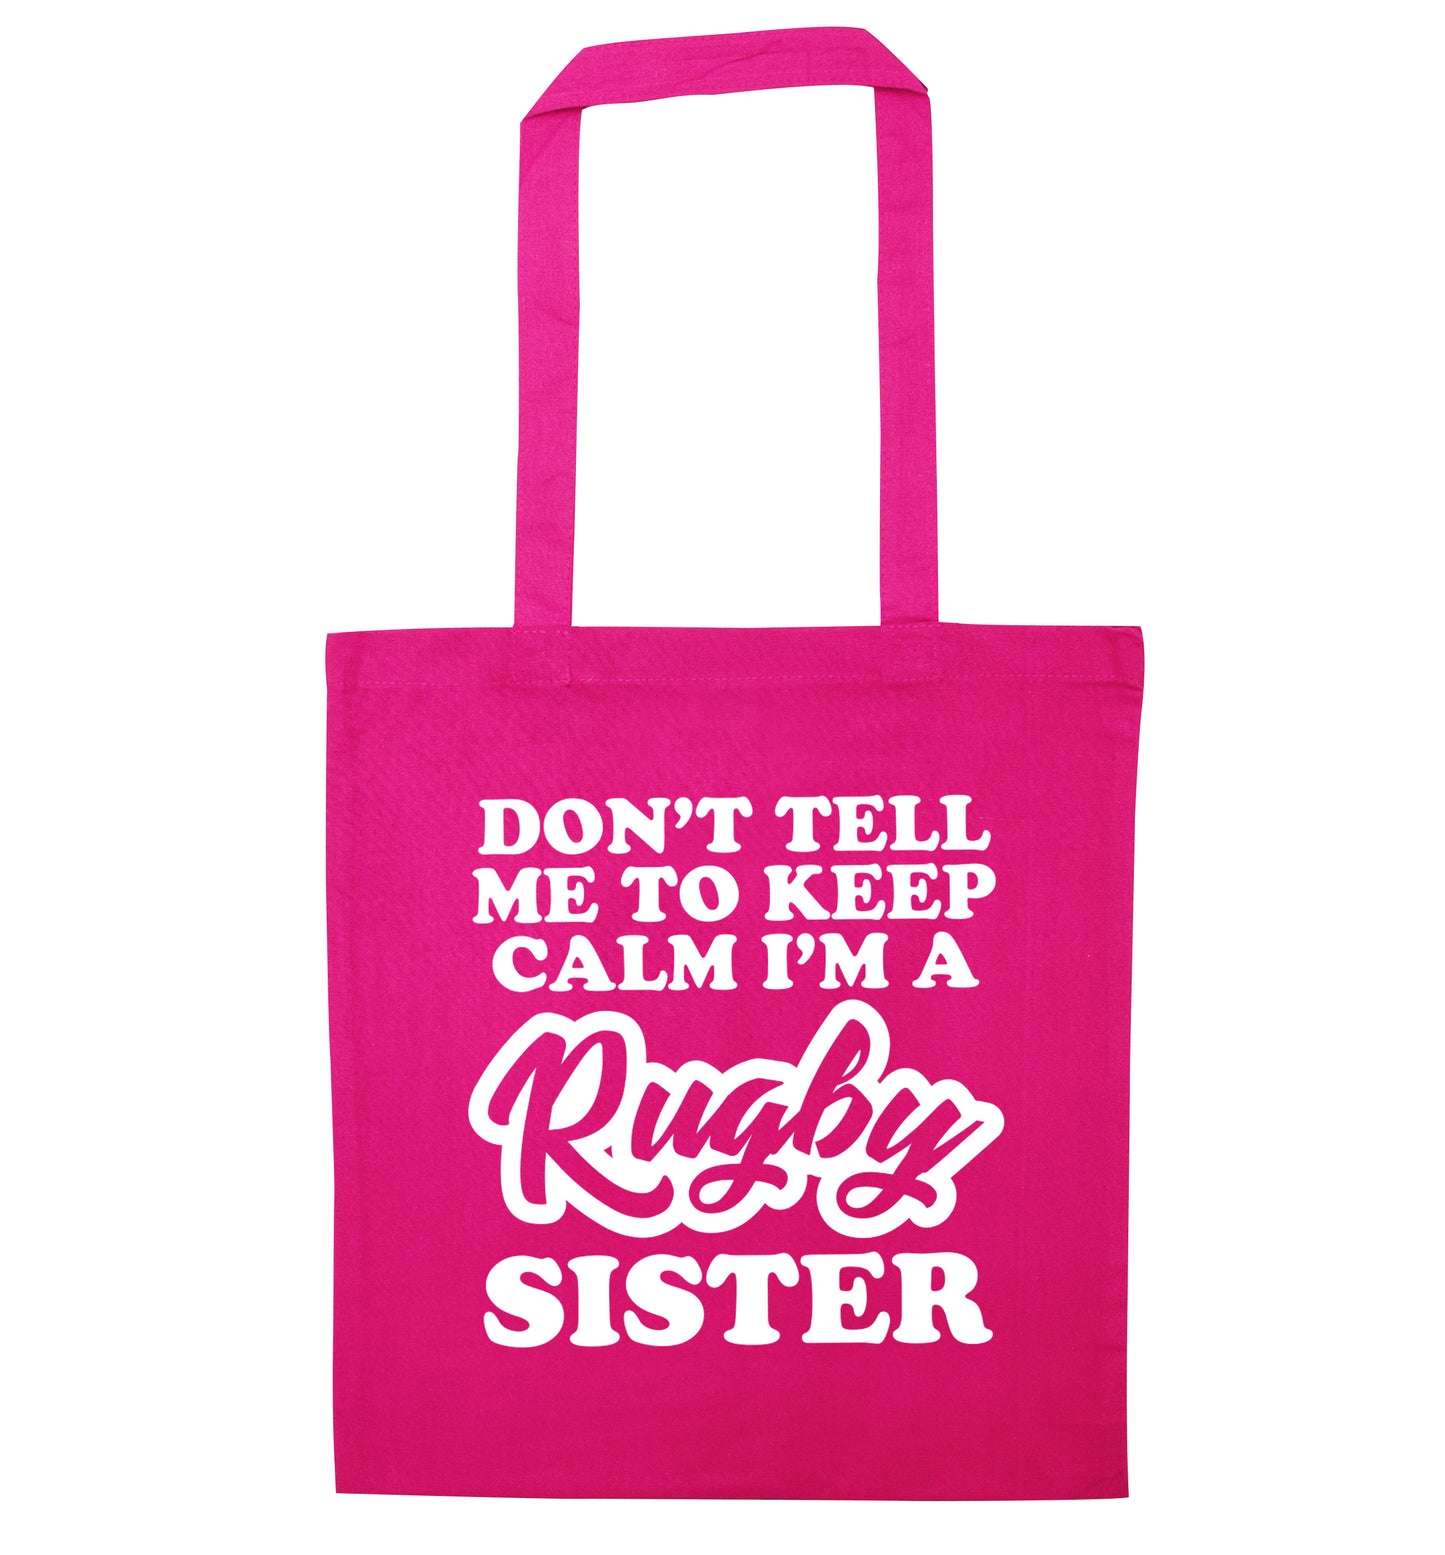 Don't tell me keep calm I'm a rugby sister pink tote bag